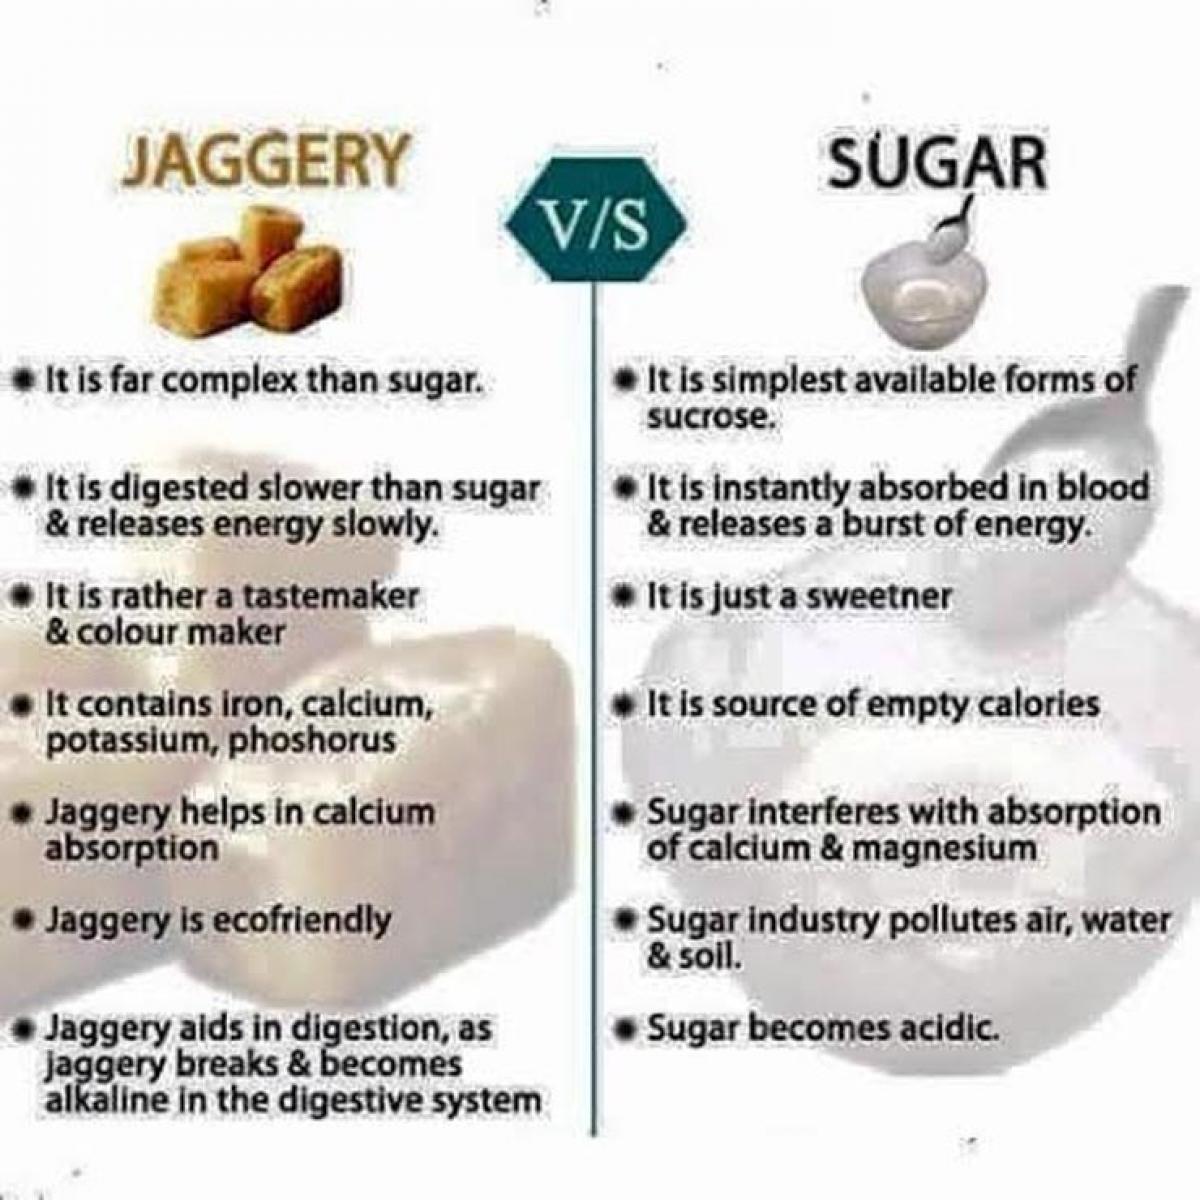 Is Jaggery better than Sugar?